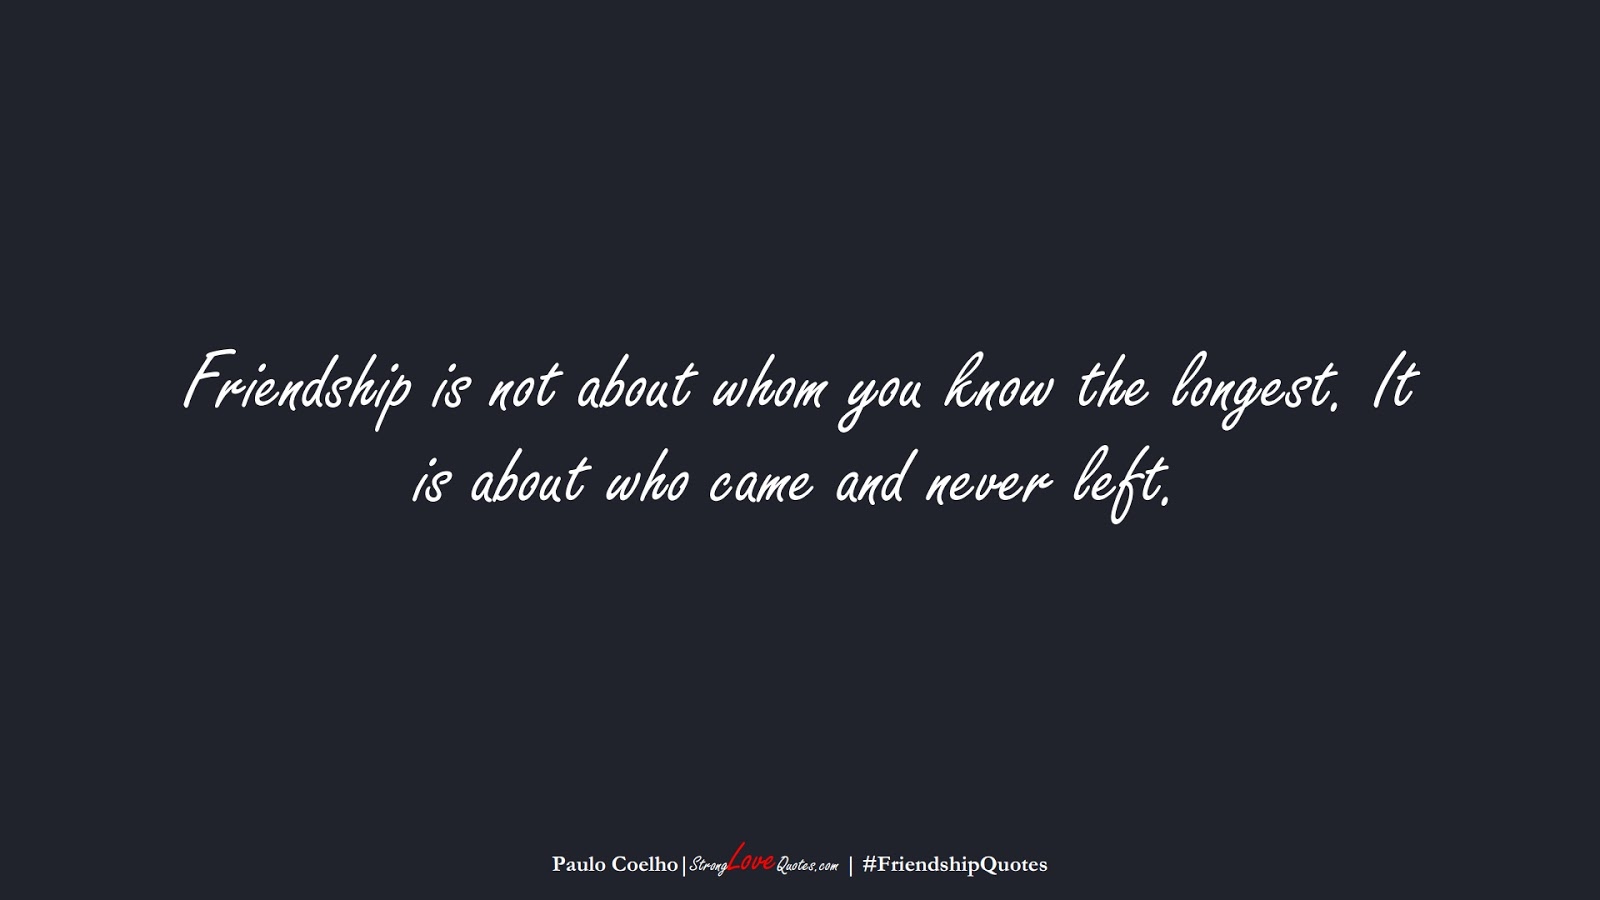 Friendship is not about whom you know the longest. It is about who came and never left. (Paulo Coelho);  #FriendshipQuotes